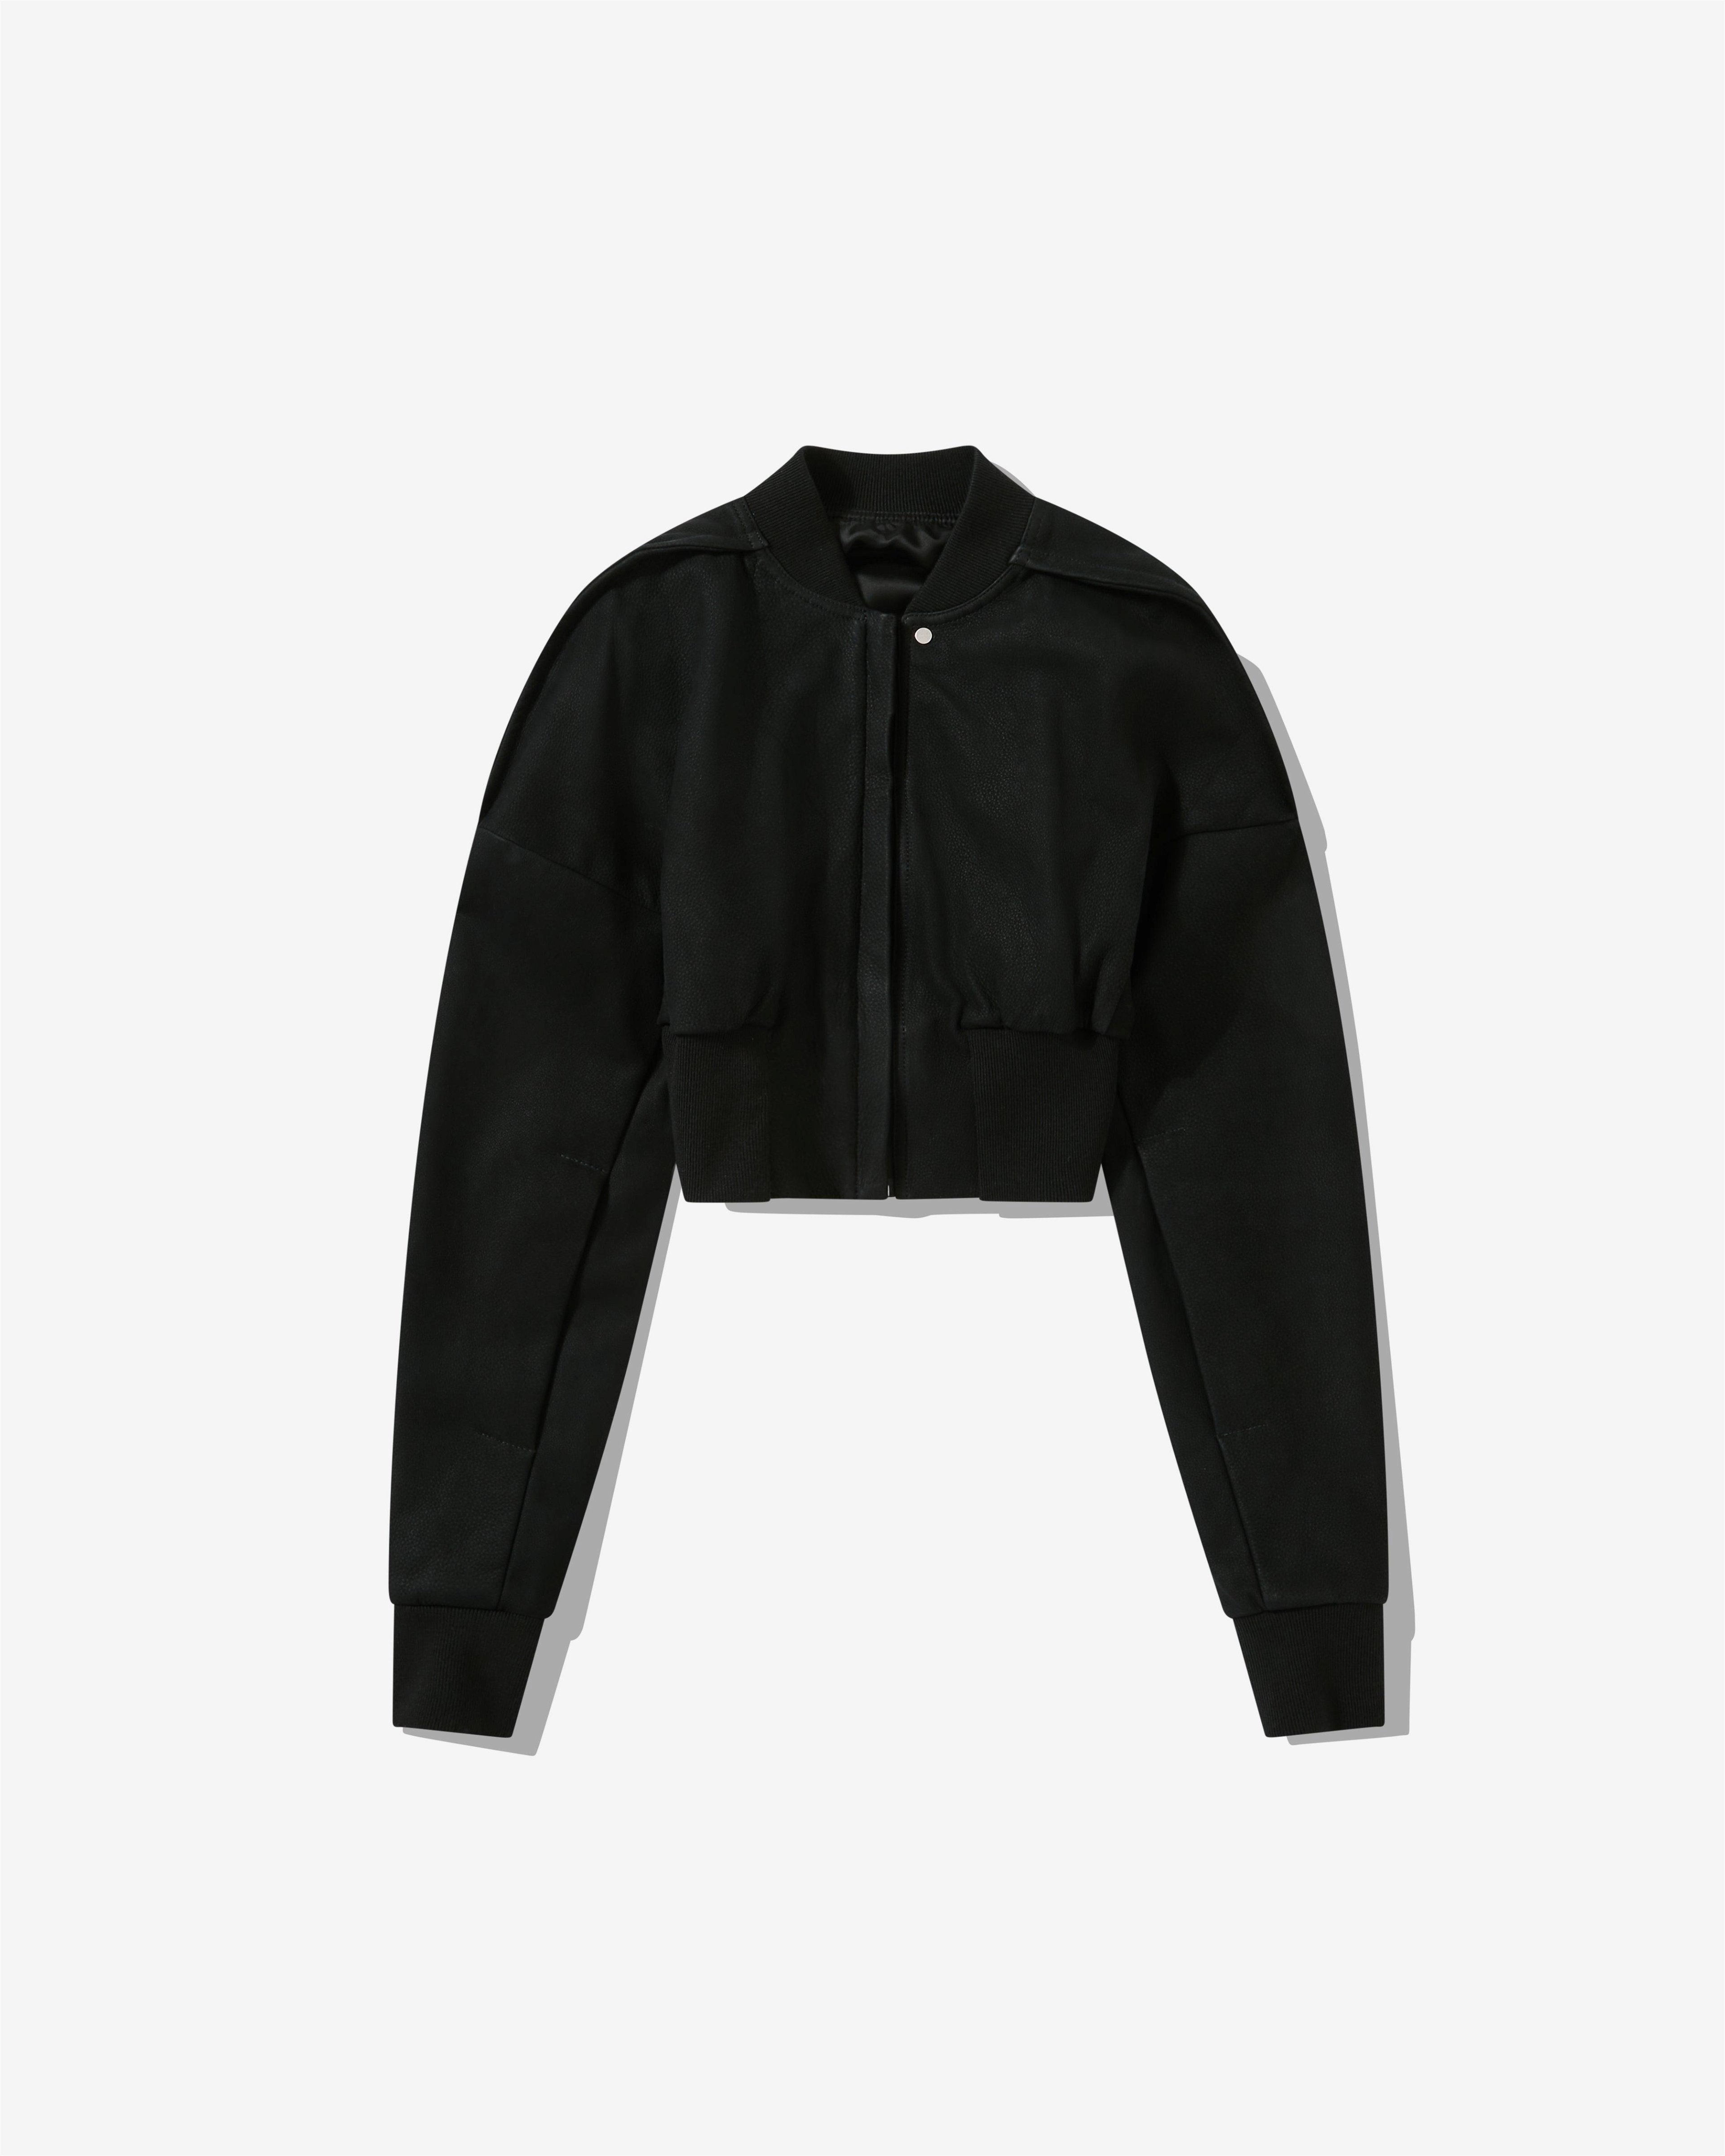 Rick Owens - Women's Leather Bomber - (Black) by RICK OWENS